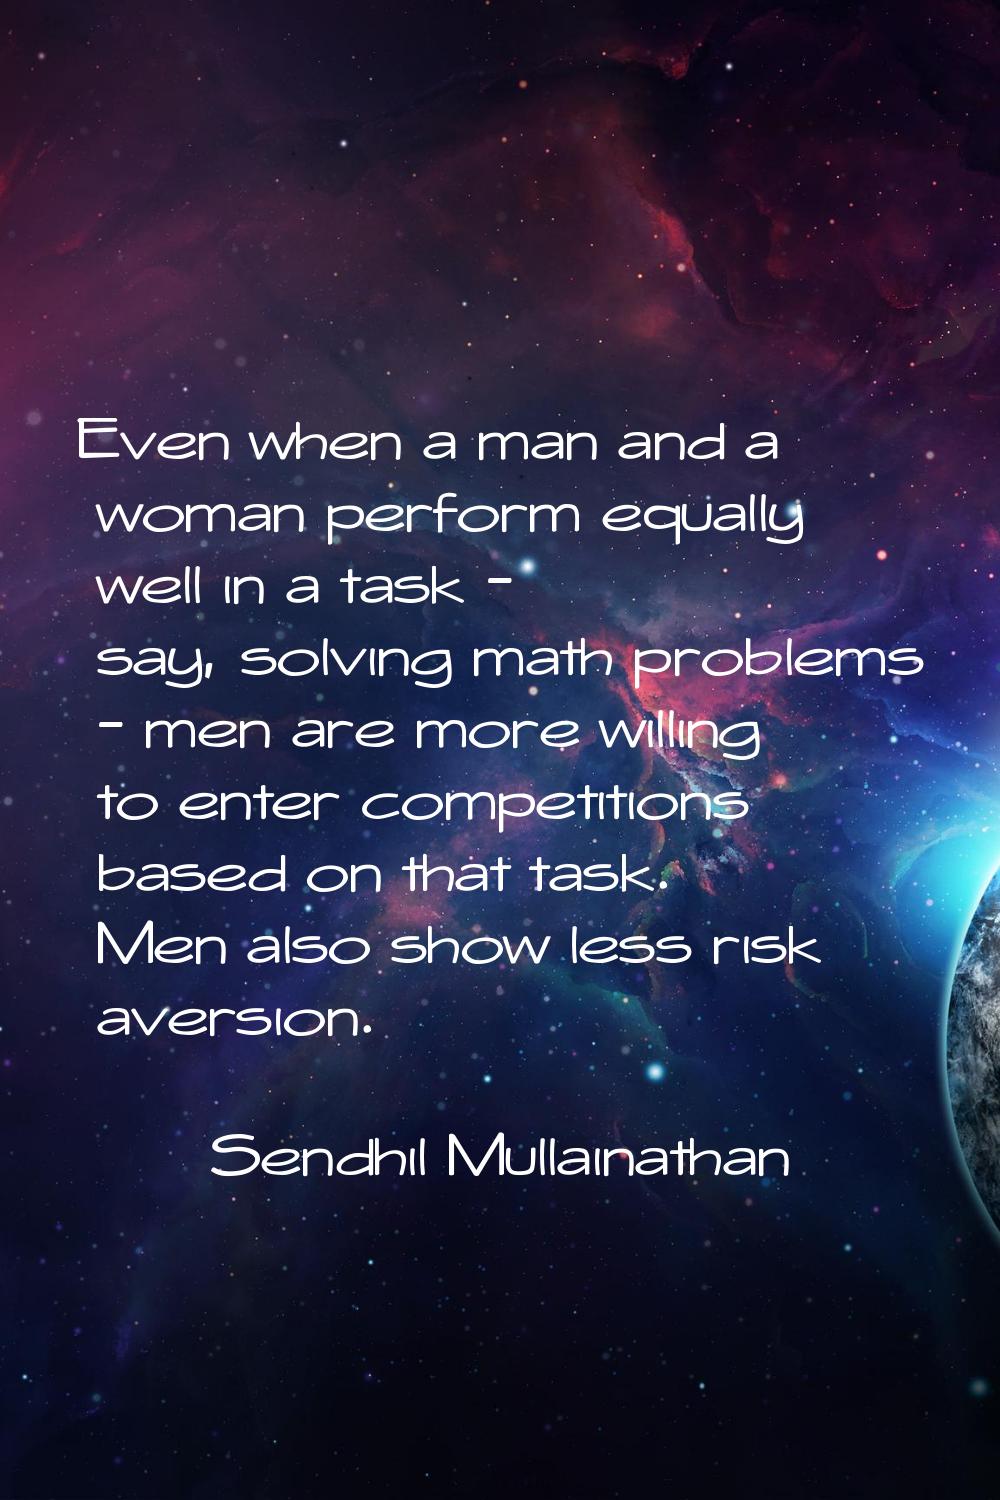 Even when a man and a woman perform equally well in a task - say, solving math problems - men are m